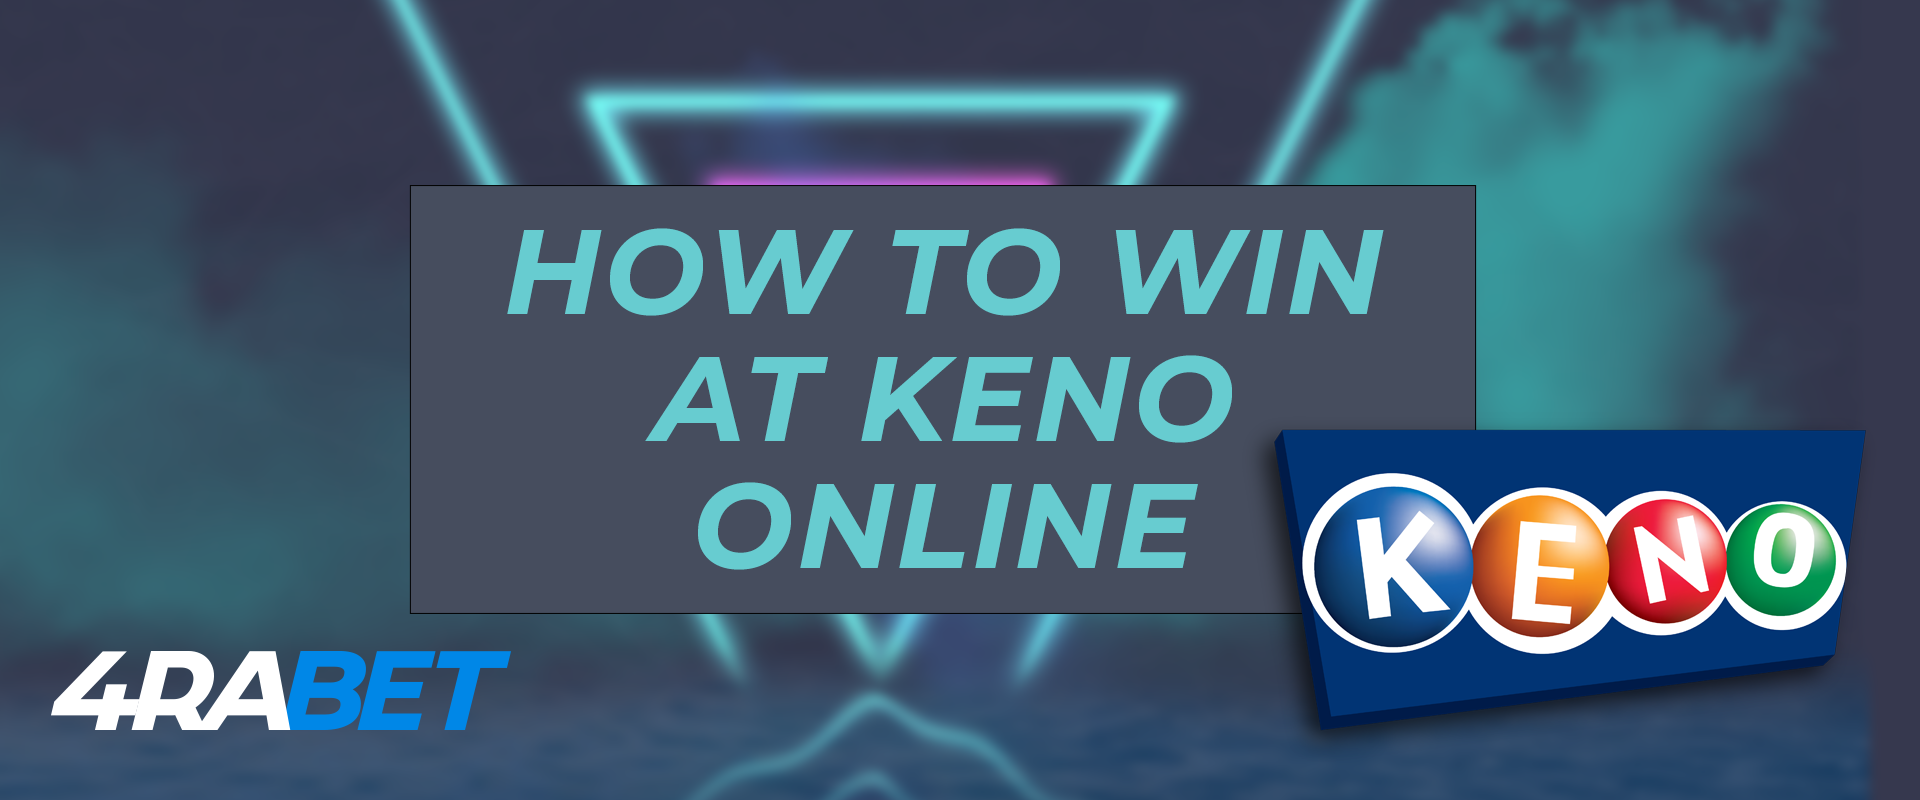 How to win at keno online.